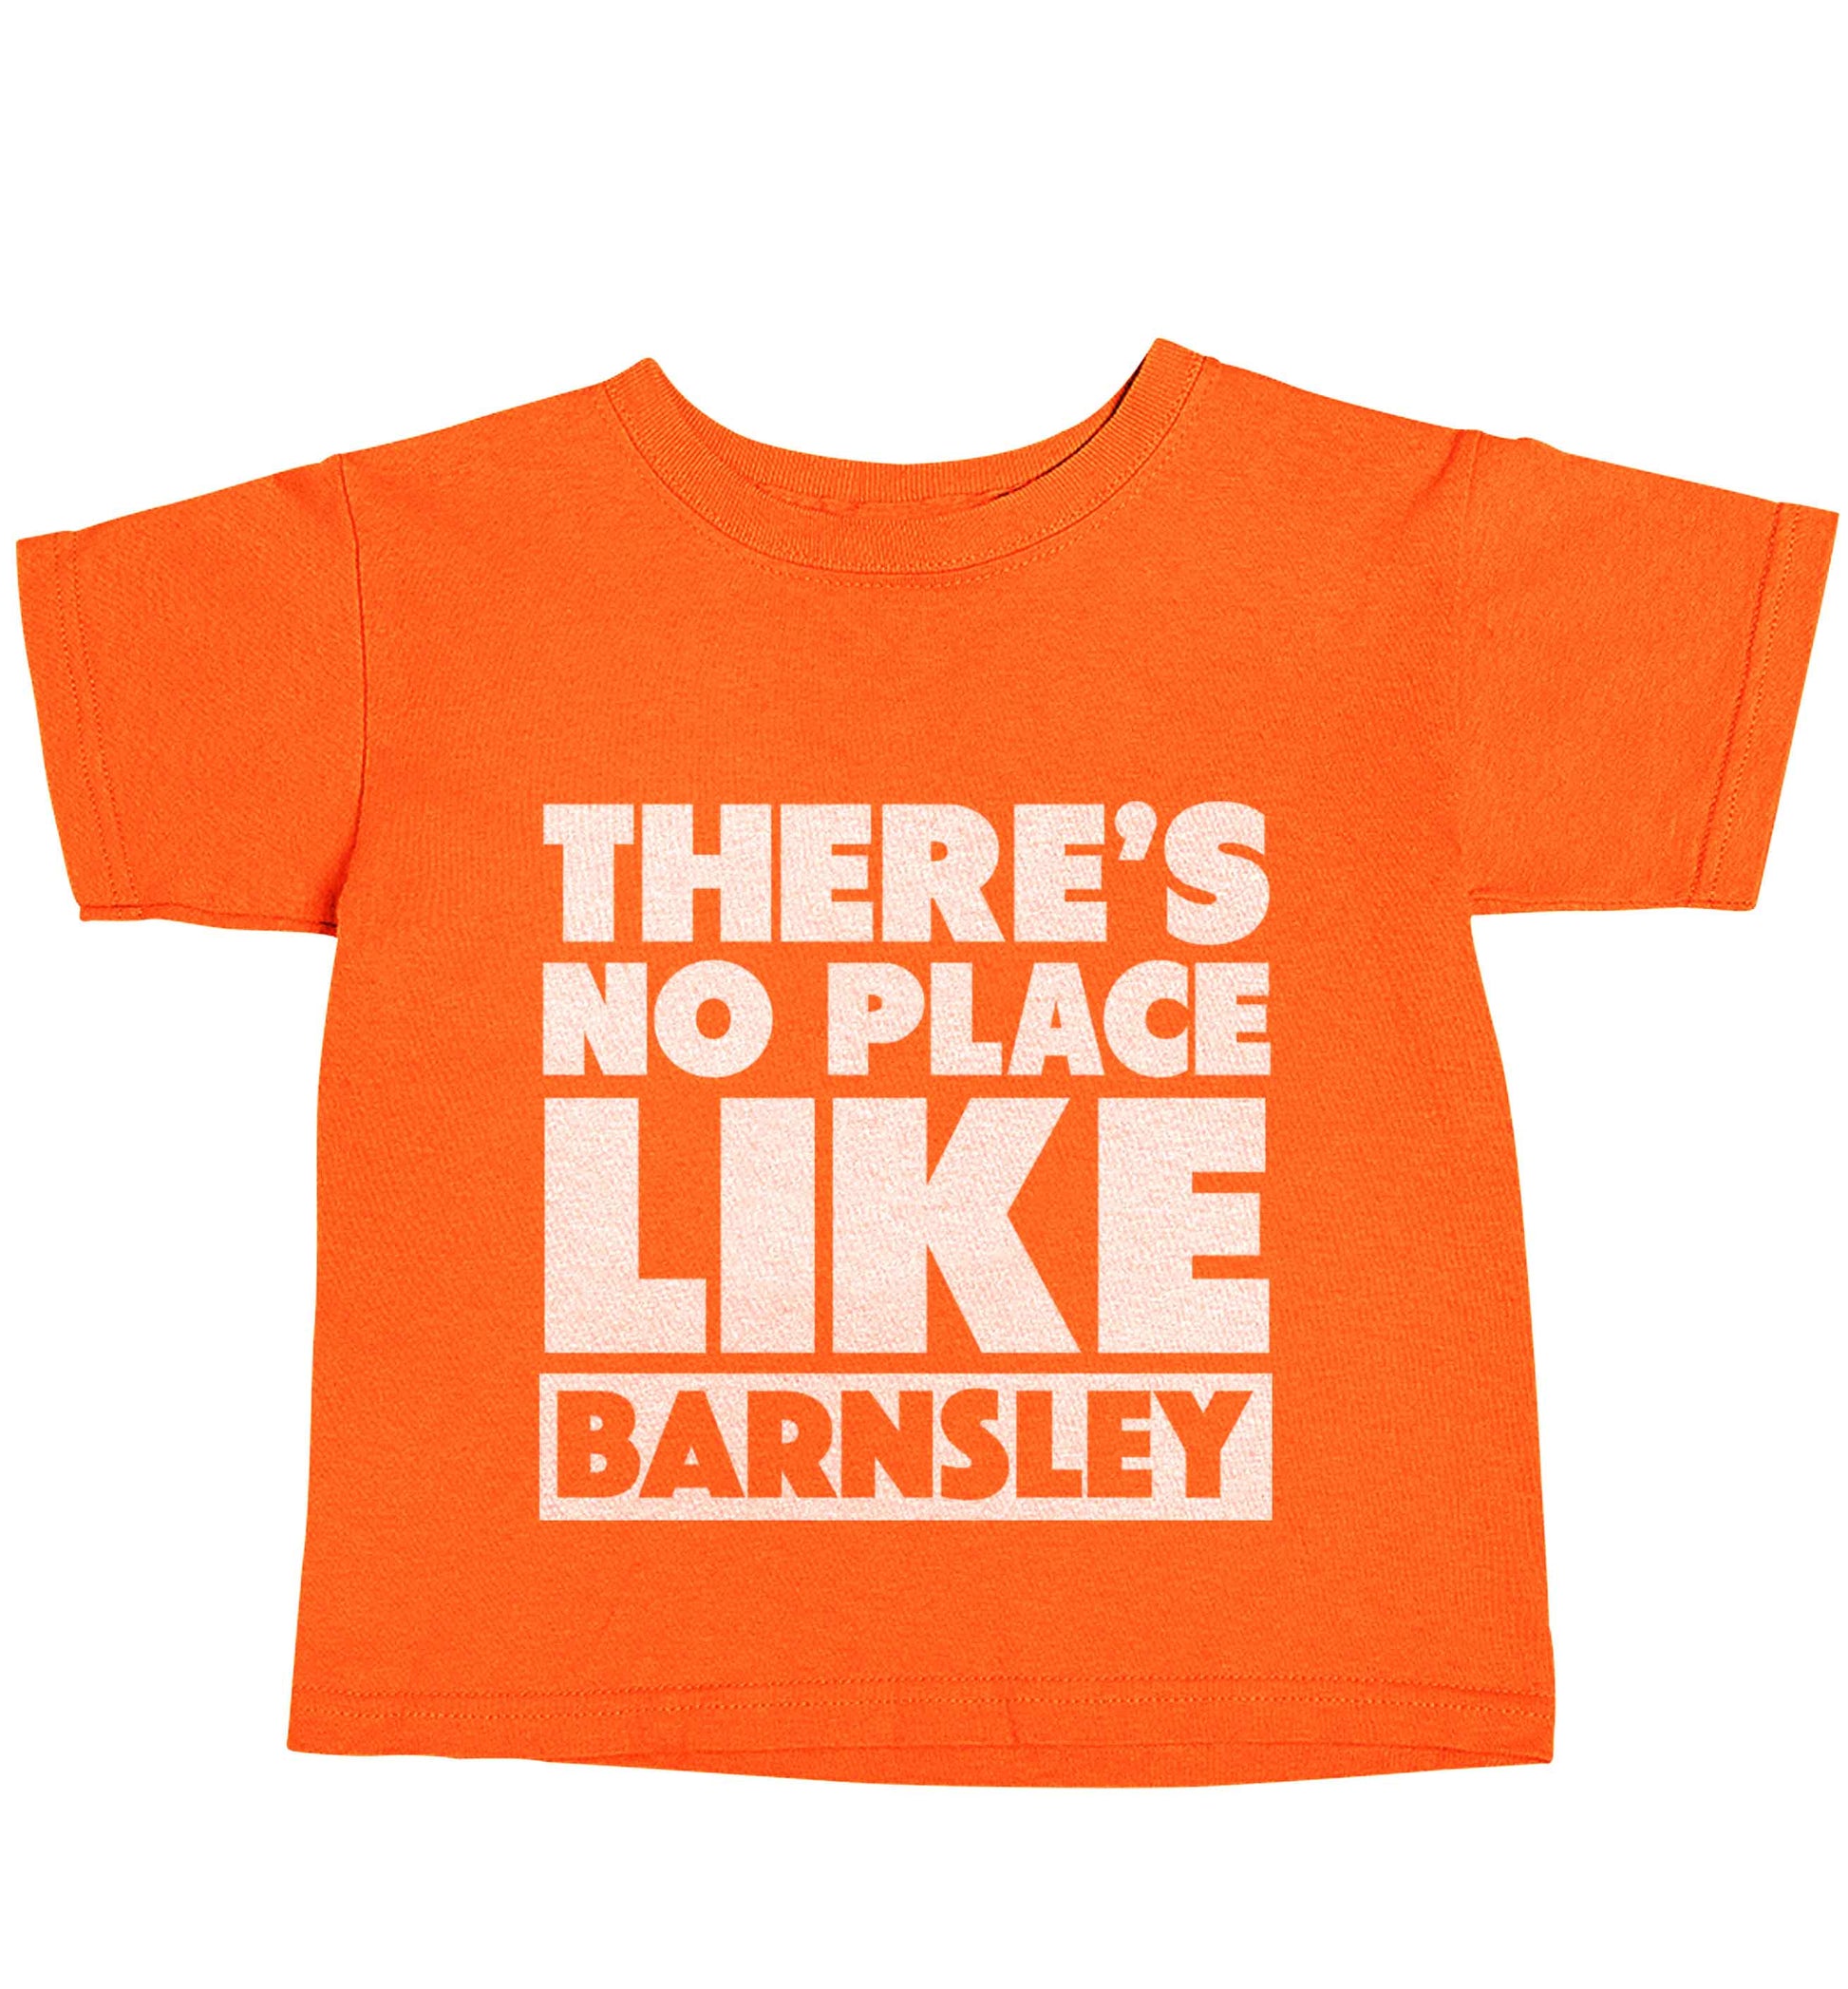 There's No Place Like Barnsley orange baby toddler Tshirt 2 Years